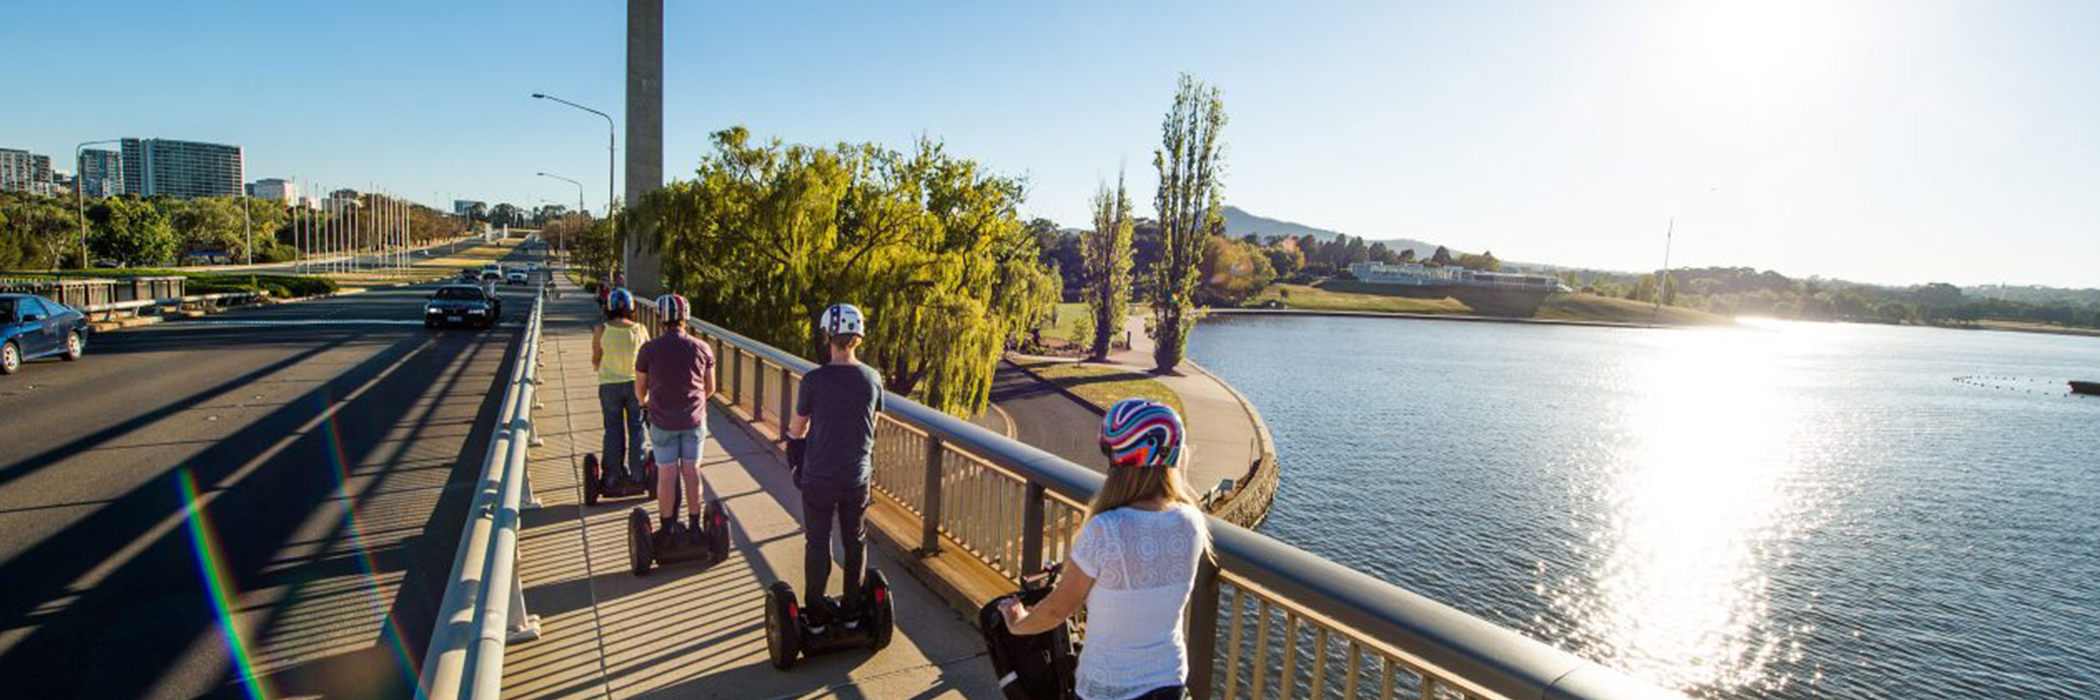 Group of children riding segways across Lake Burley Griffin. Family activities in Canberra.